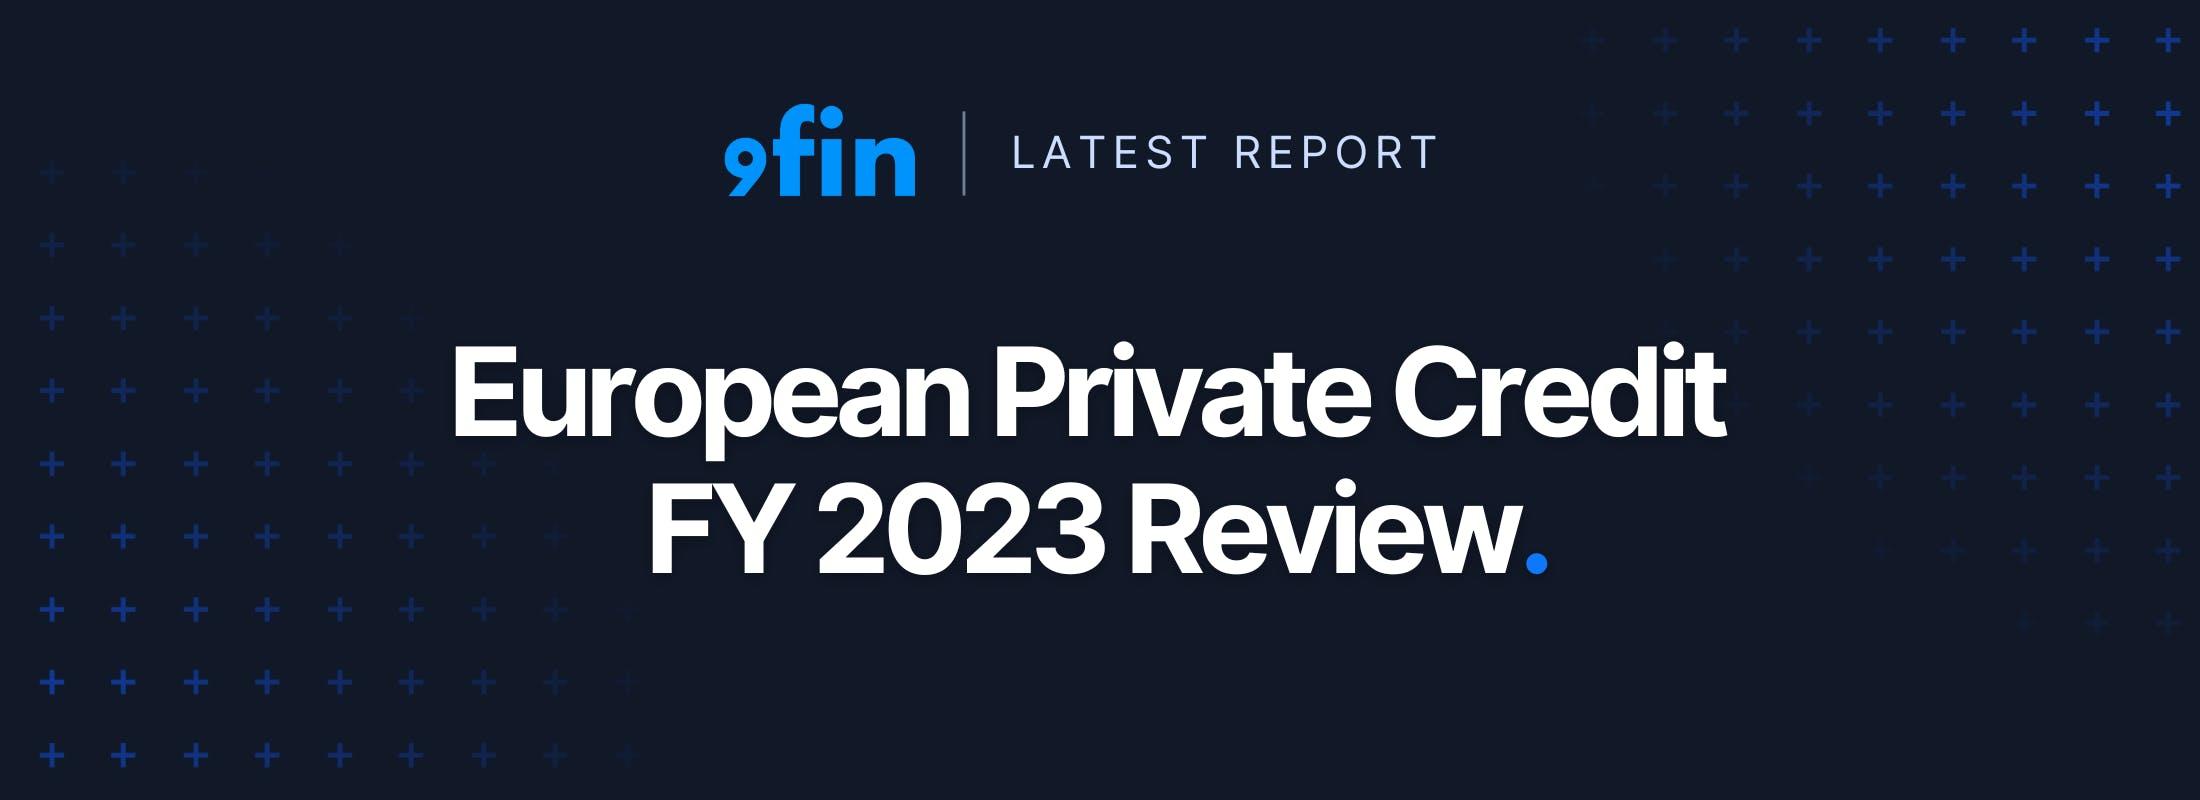 European Private Credit FY 2023 Review